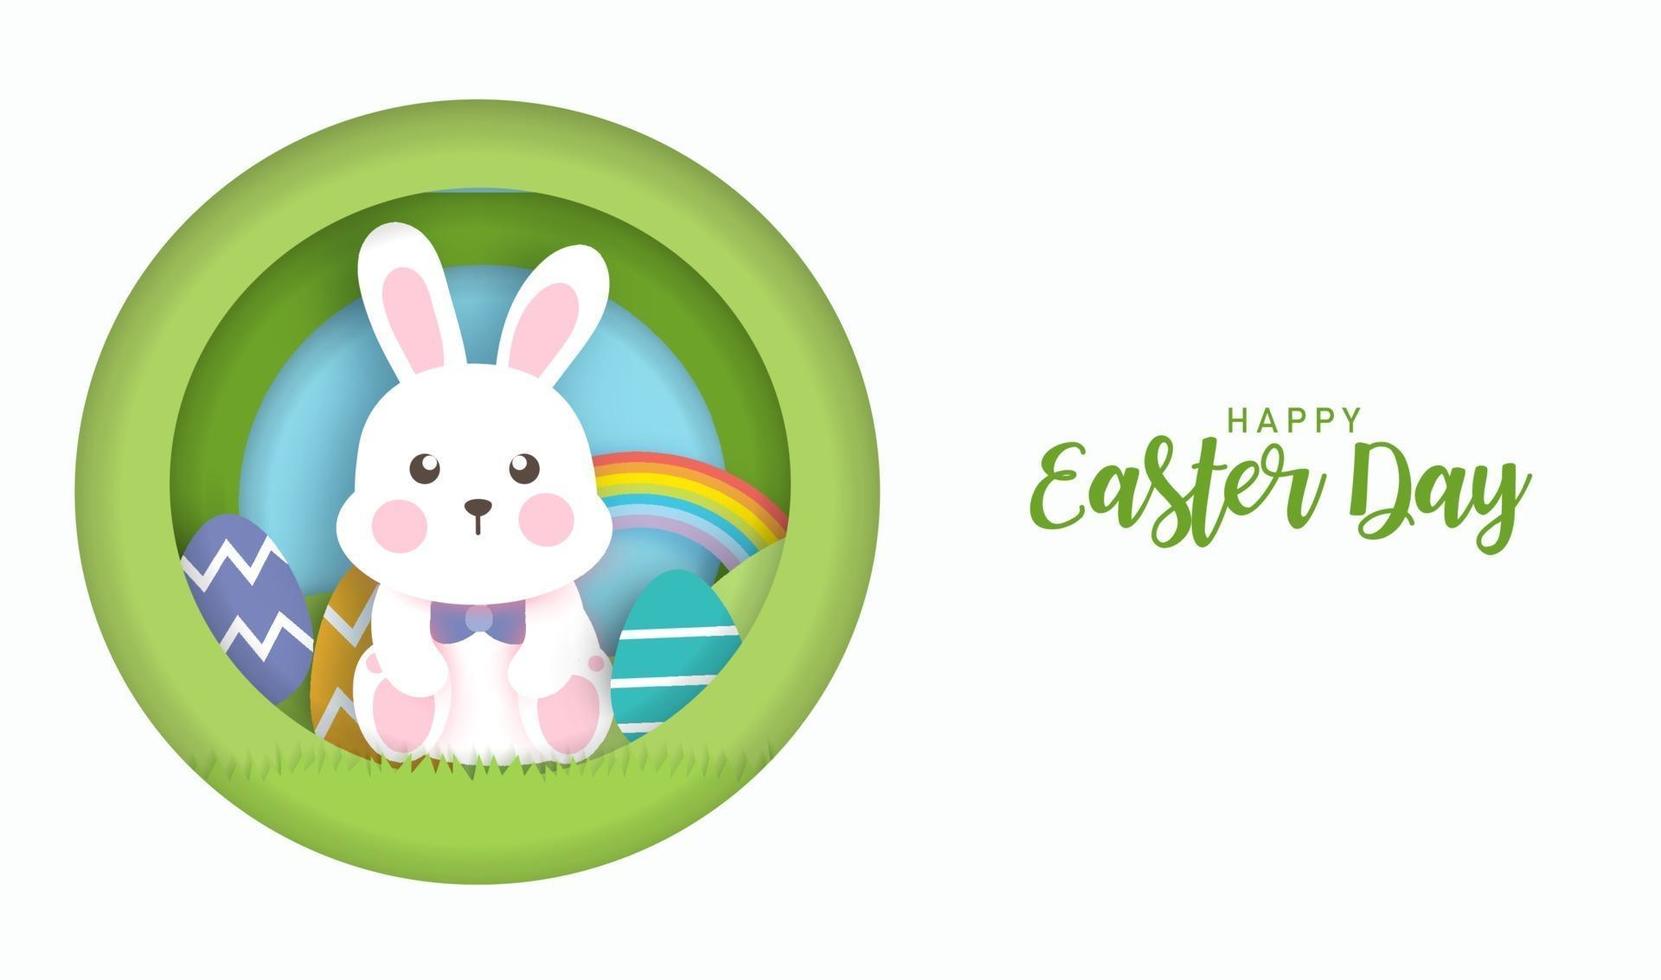 Easter day background and banner vector